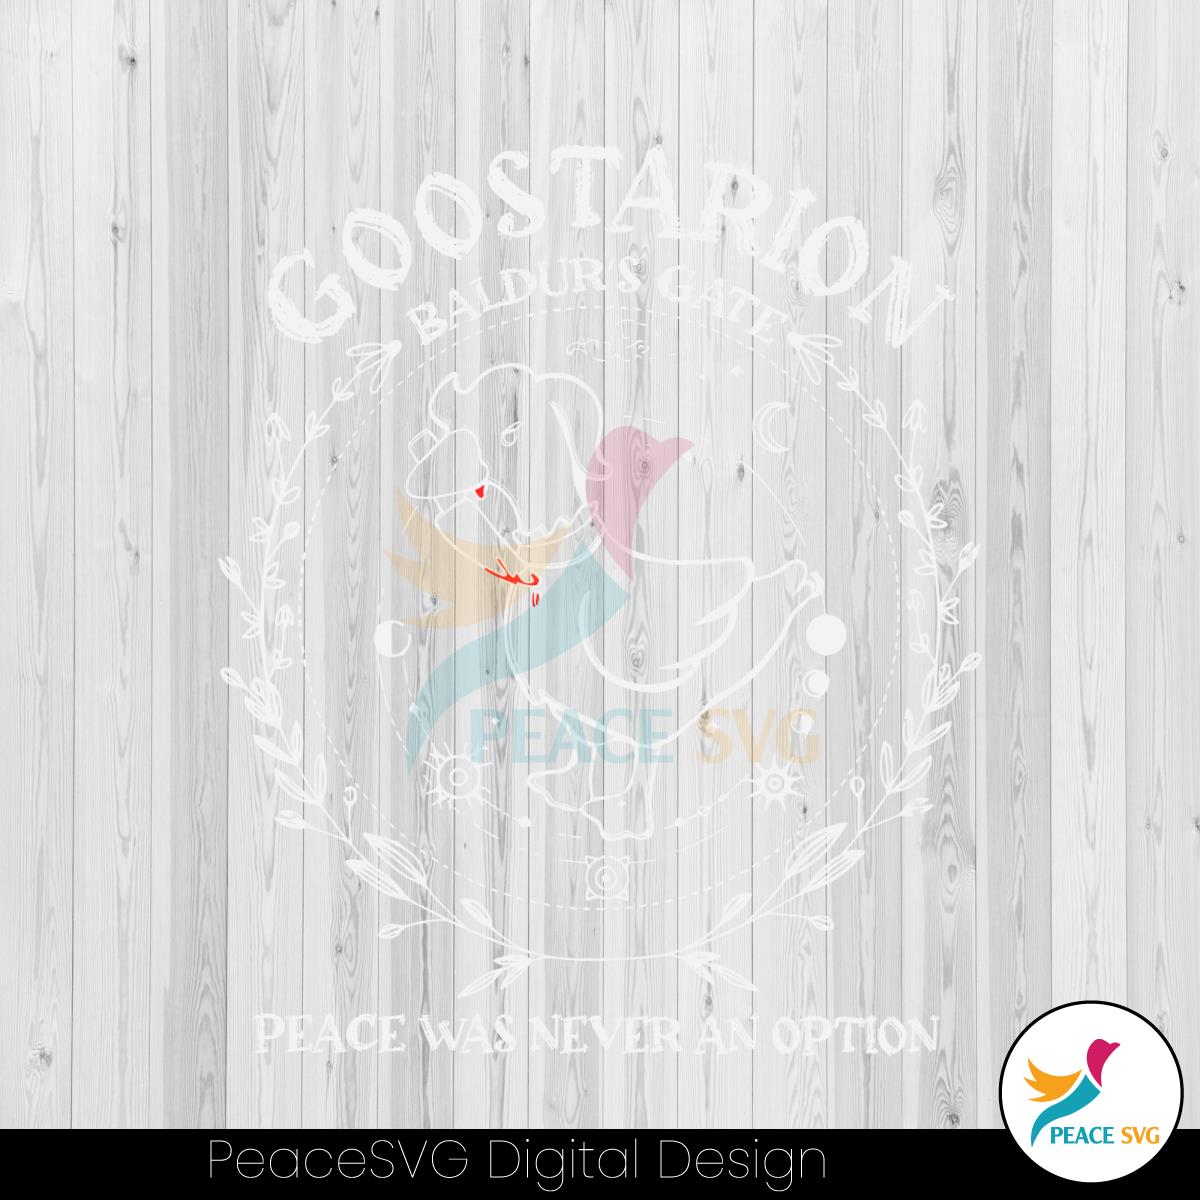 goostarion-peace-was-never-an-option-svg-cutting-file